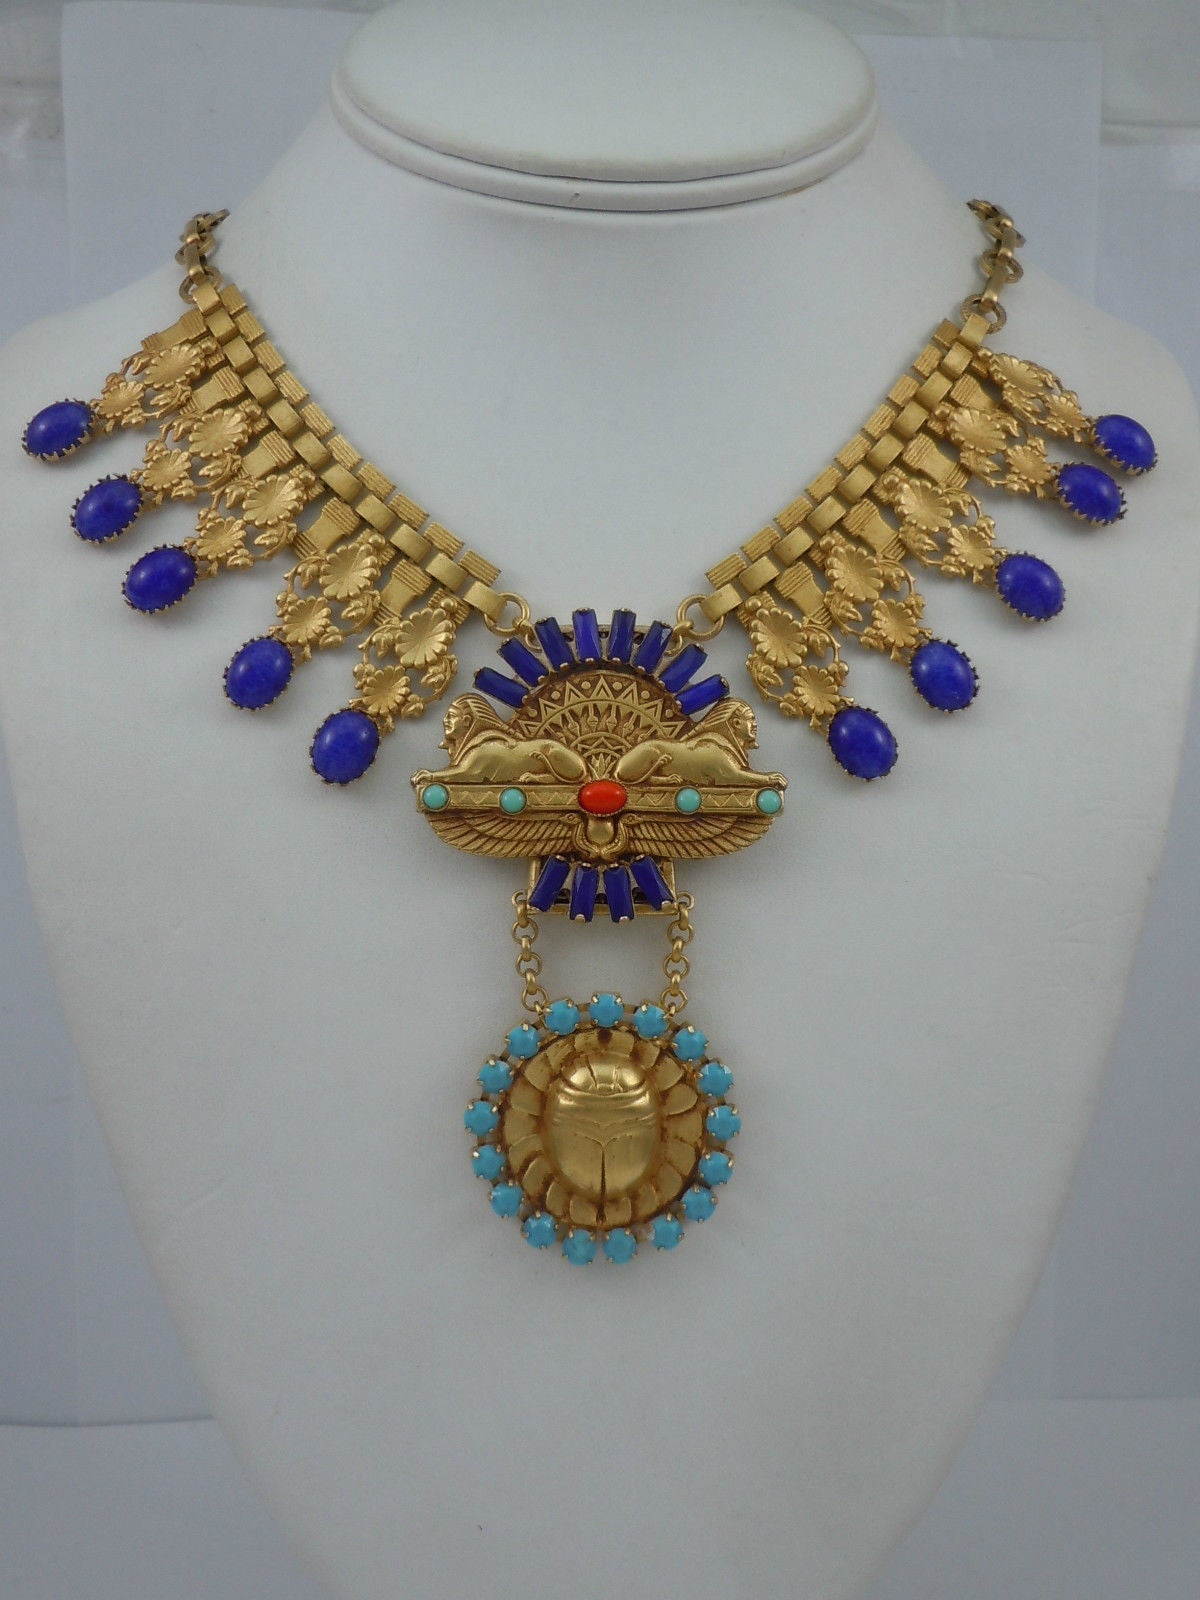 Contemporary Askew London 'Egyptian Revival' Double Sphinx Statement Necklace